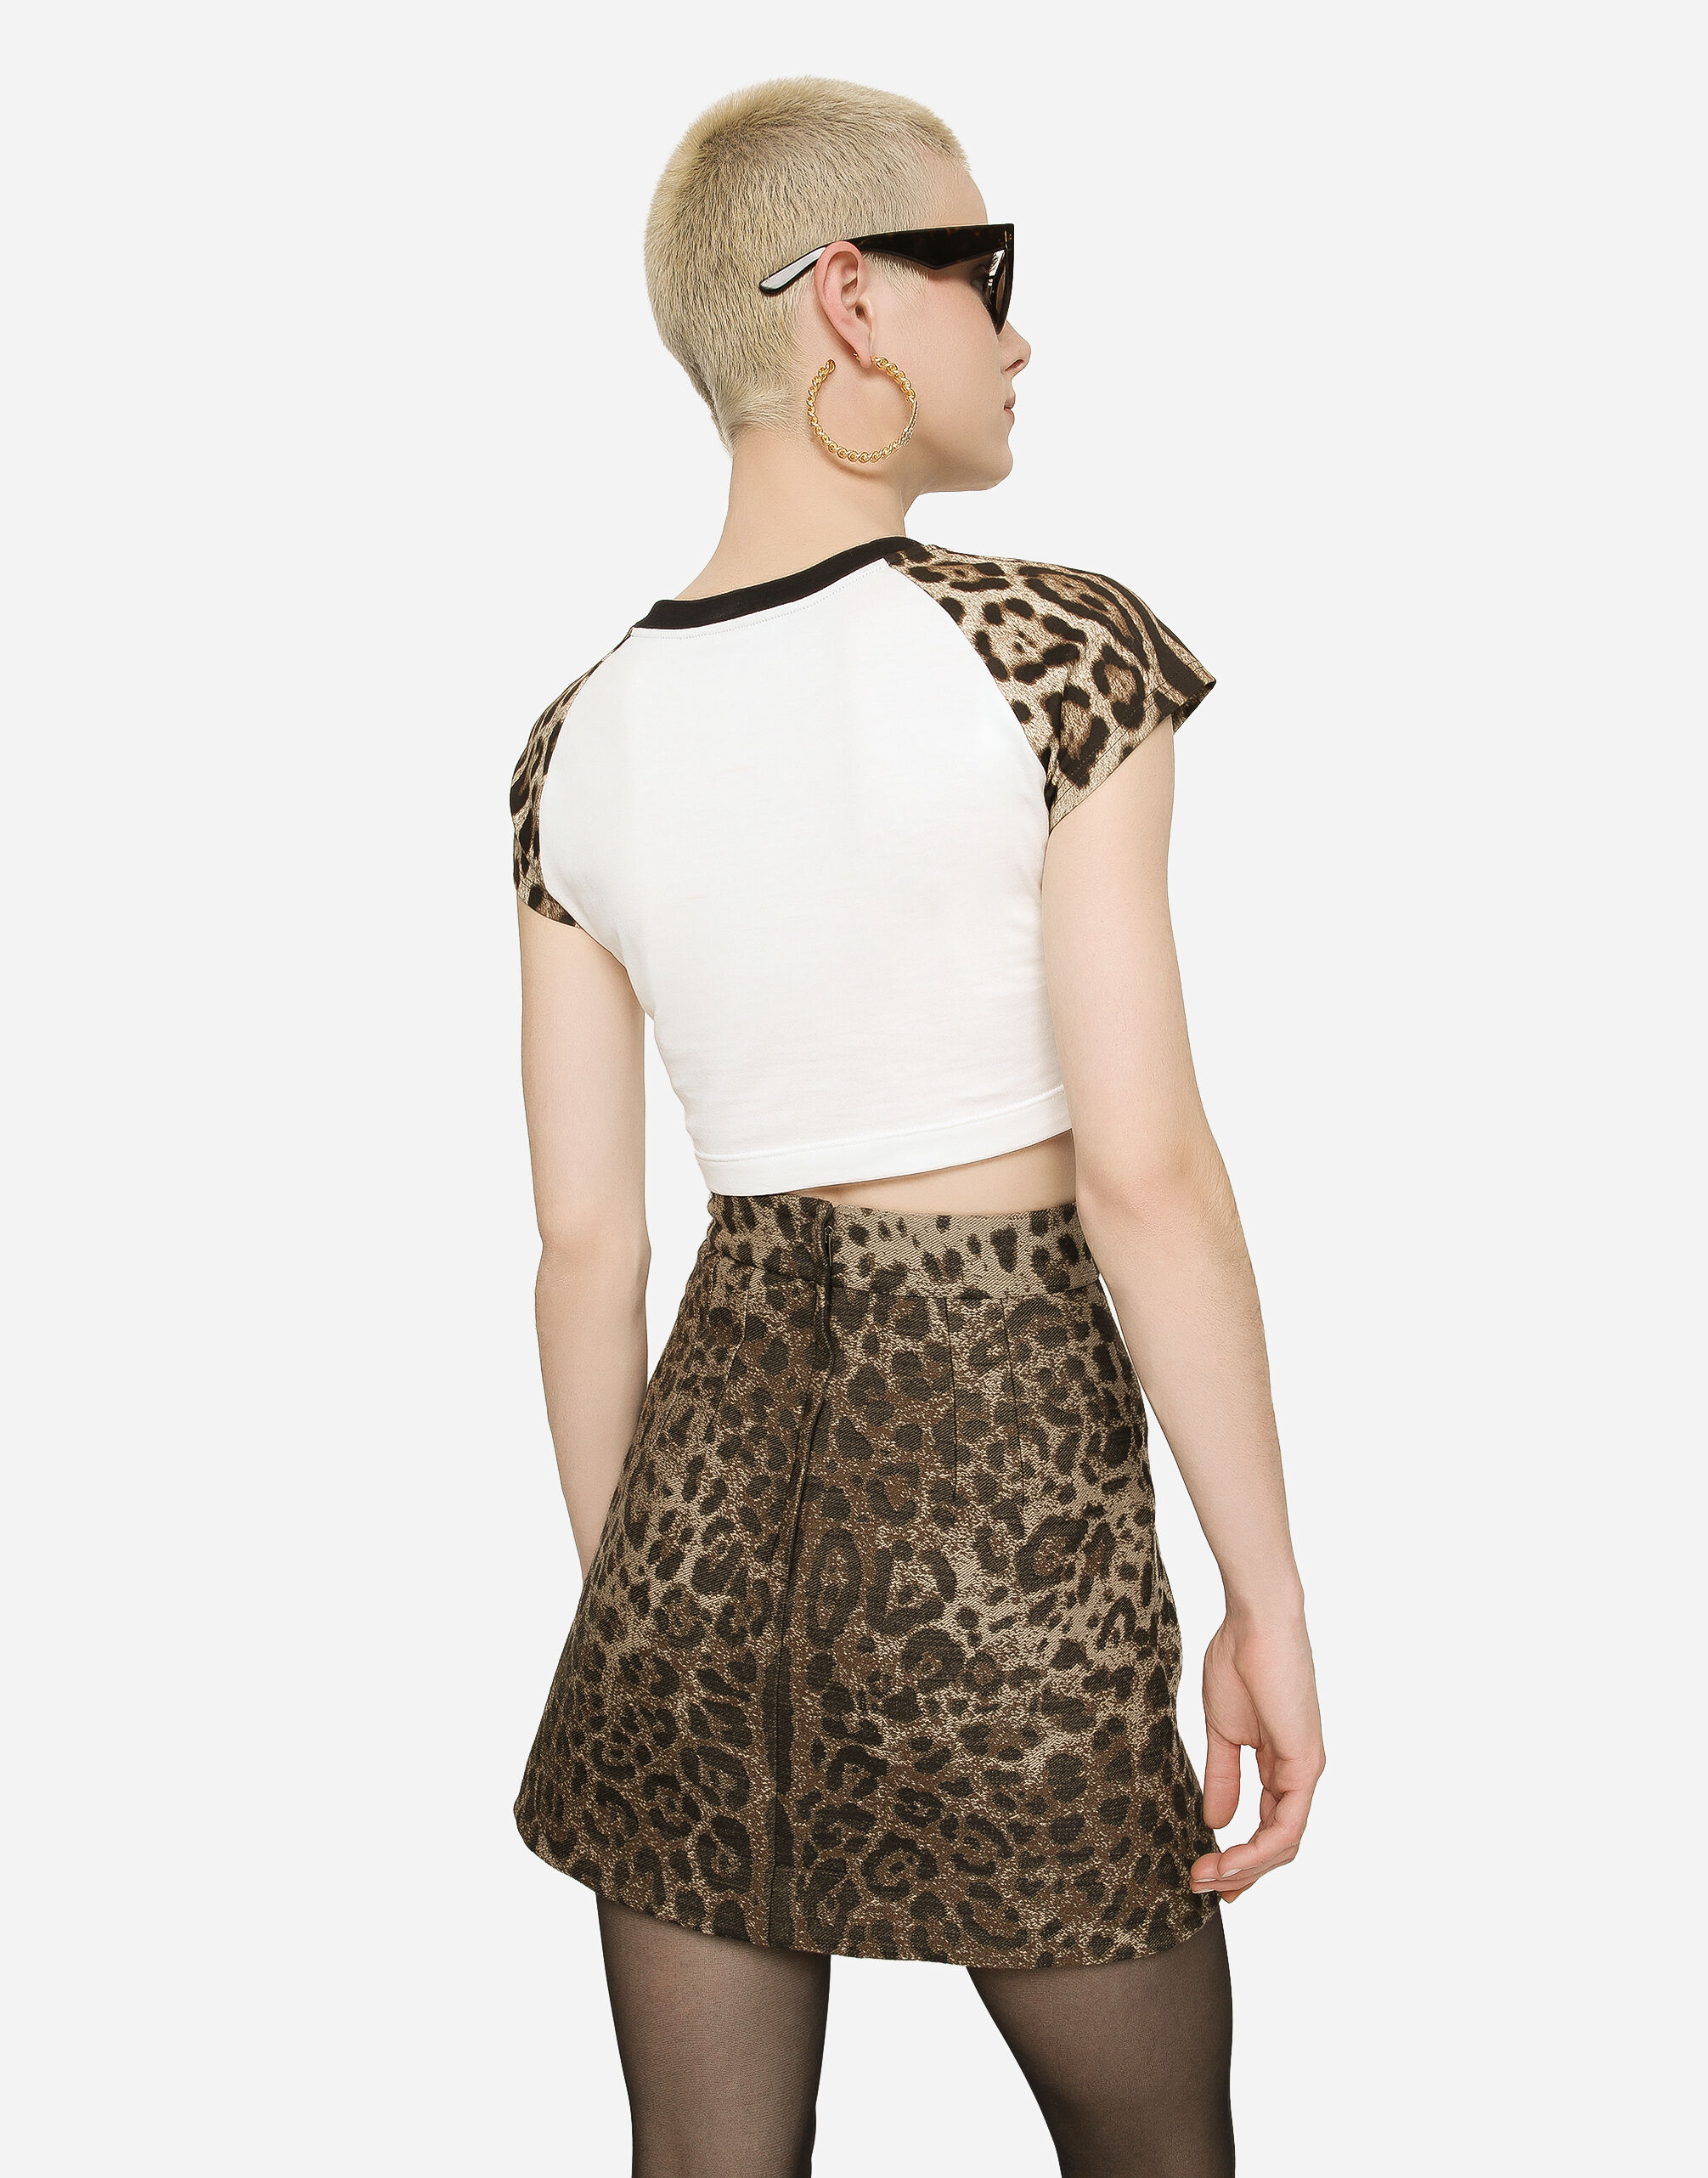 Short wool skirt with jacquard leopard design in Multicolor for 